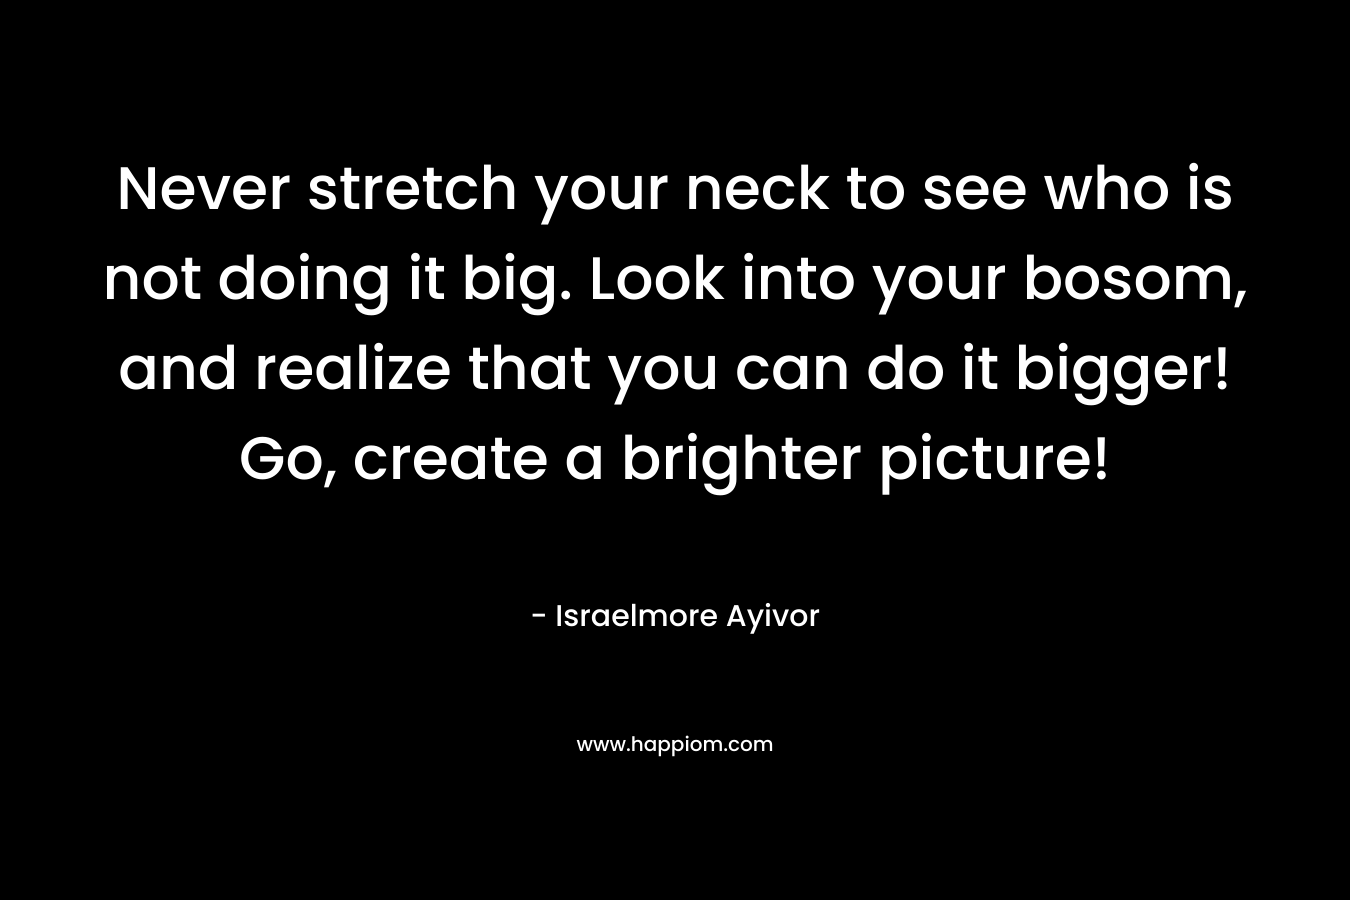 Never stretch your neck to see who is not doing it big. Look into your bosom, and realize that you can do it bigger! Go, create a brighter picture! – Israelmore Ayivor